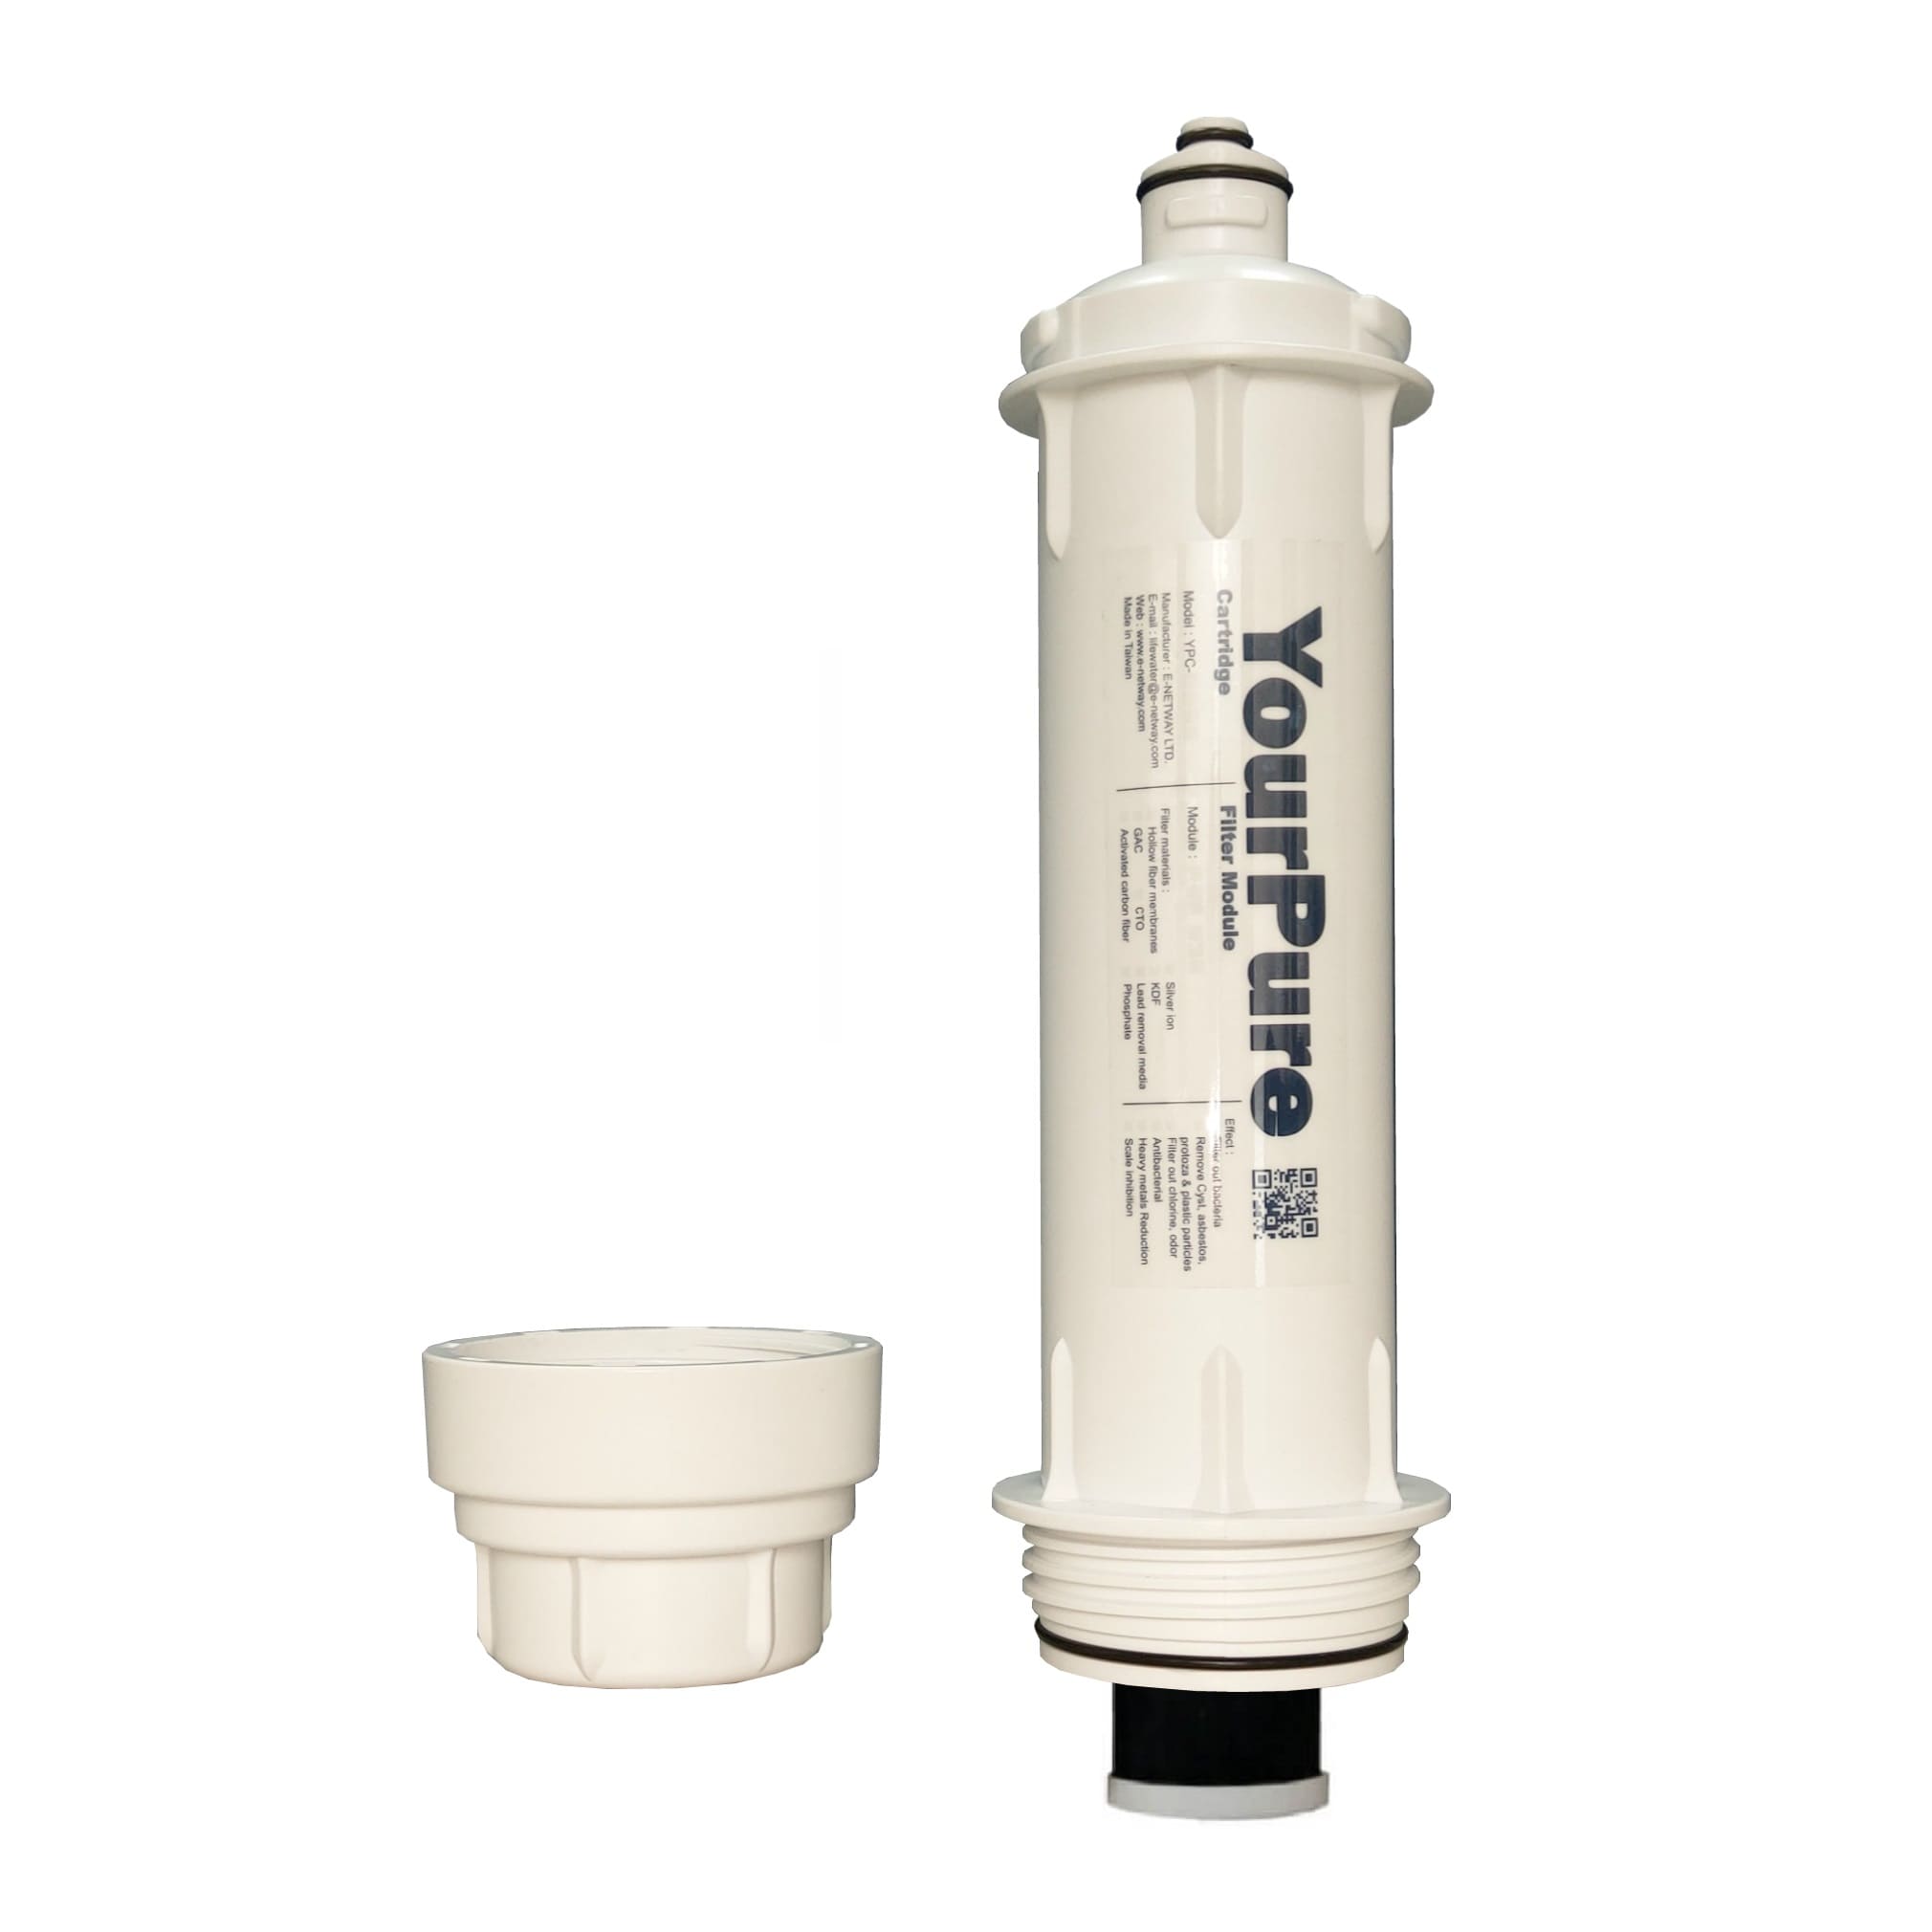 Quick-release water purifier for chlorine removal